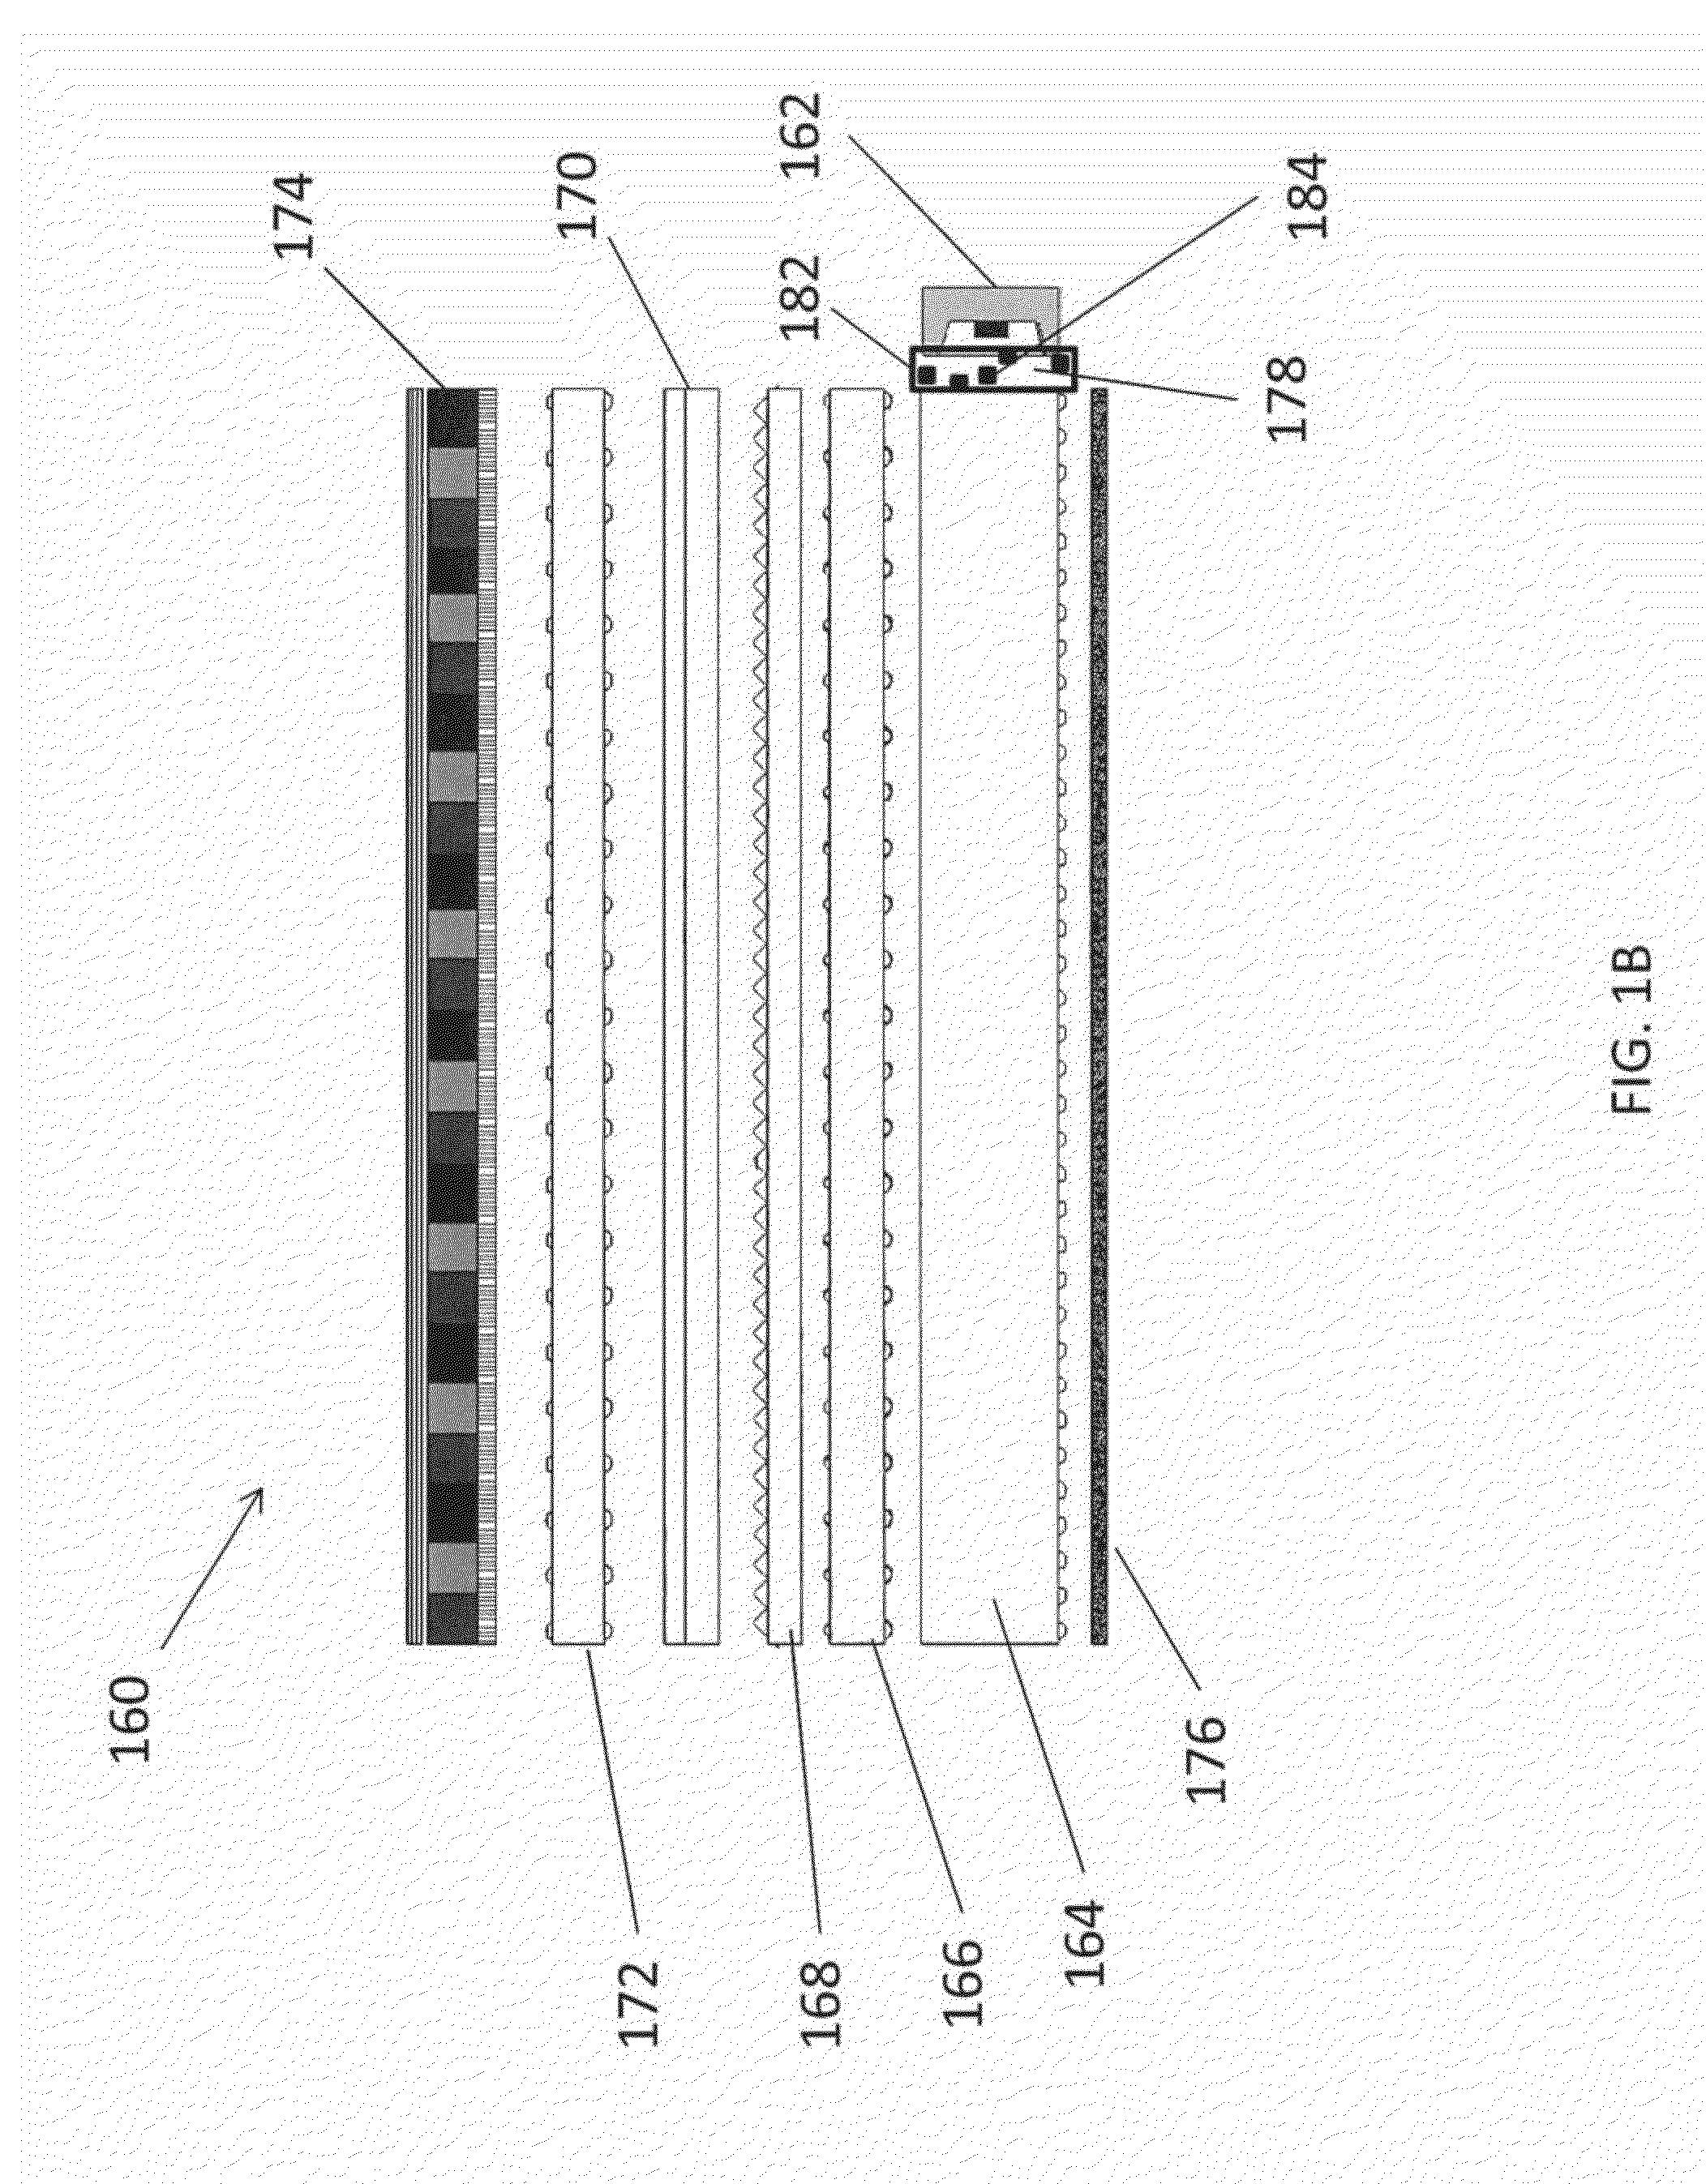 Light emitting diode (LED) devices